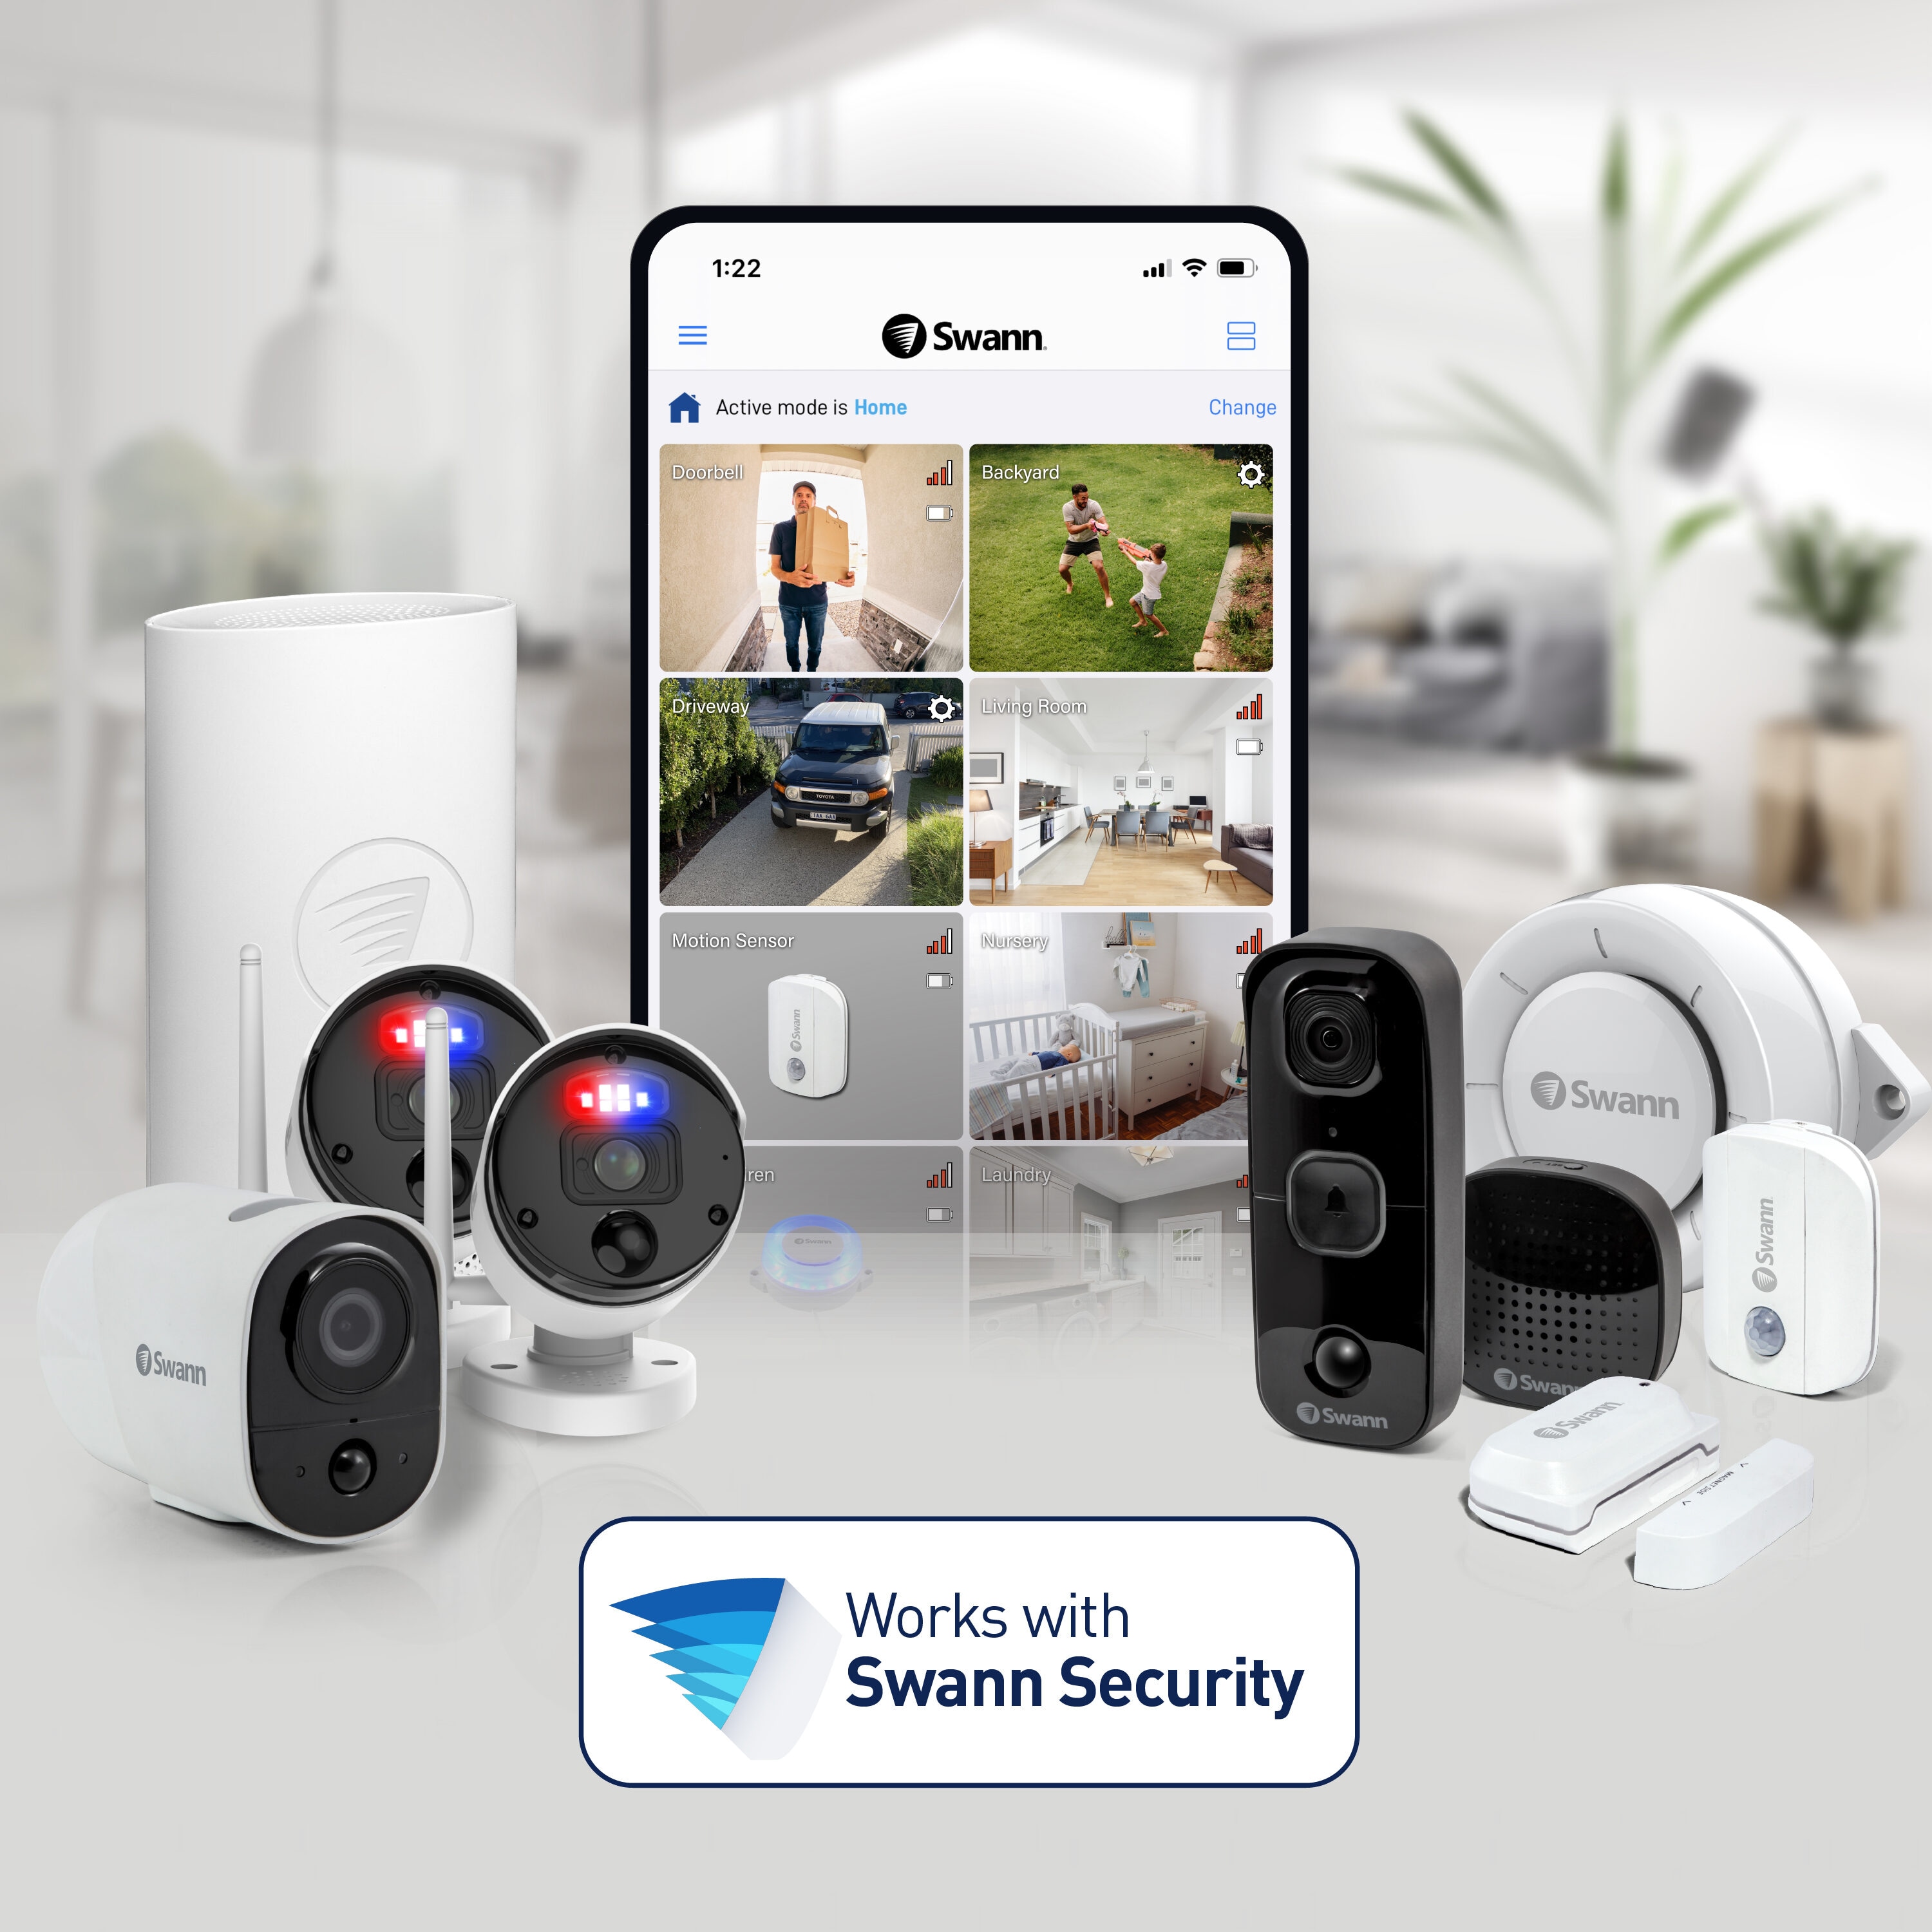 How to Choose the Best Microphone for Swann Security Cameras